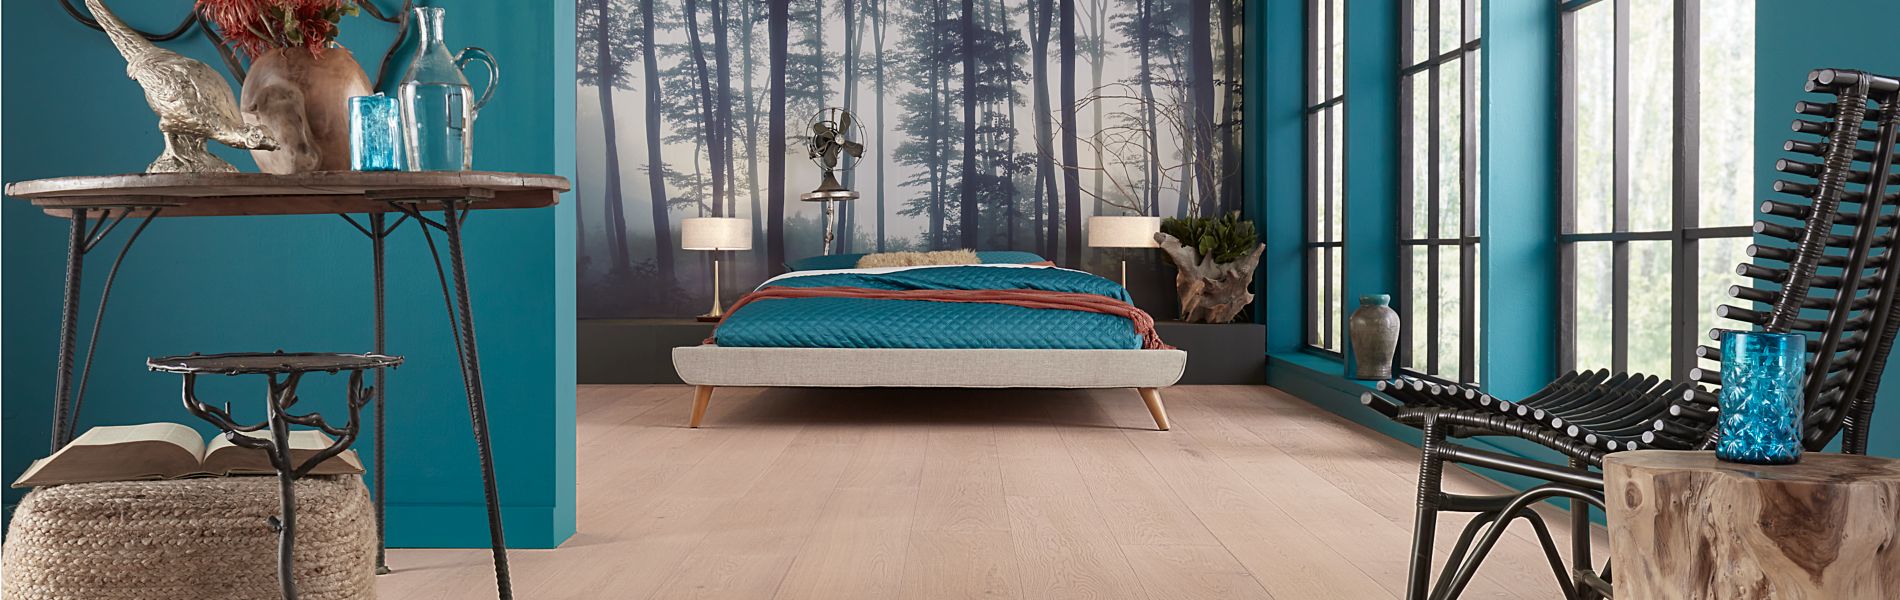 Light laminate floors in an aqua blue bedroom with natural finished